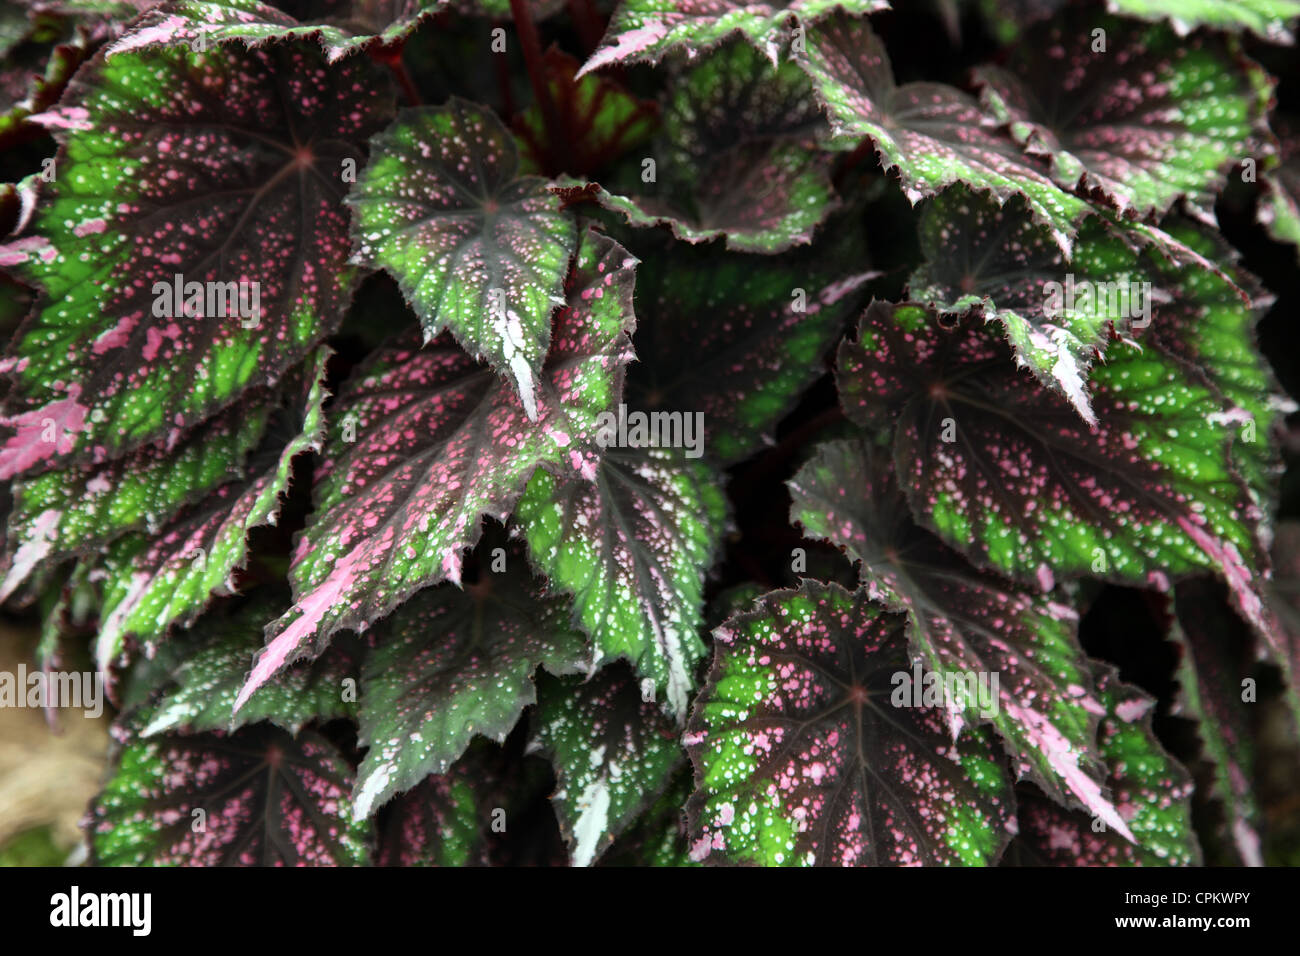 Begonia African Jungle shown by Enterprise Plants Chelsea Flower Show 2012  Stock Photo - Alamy